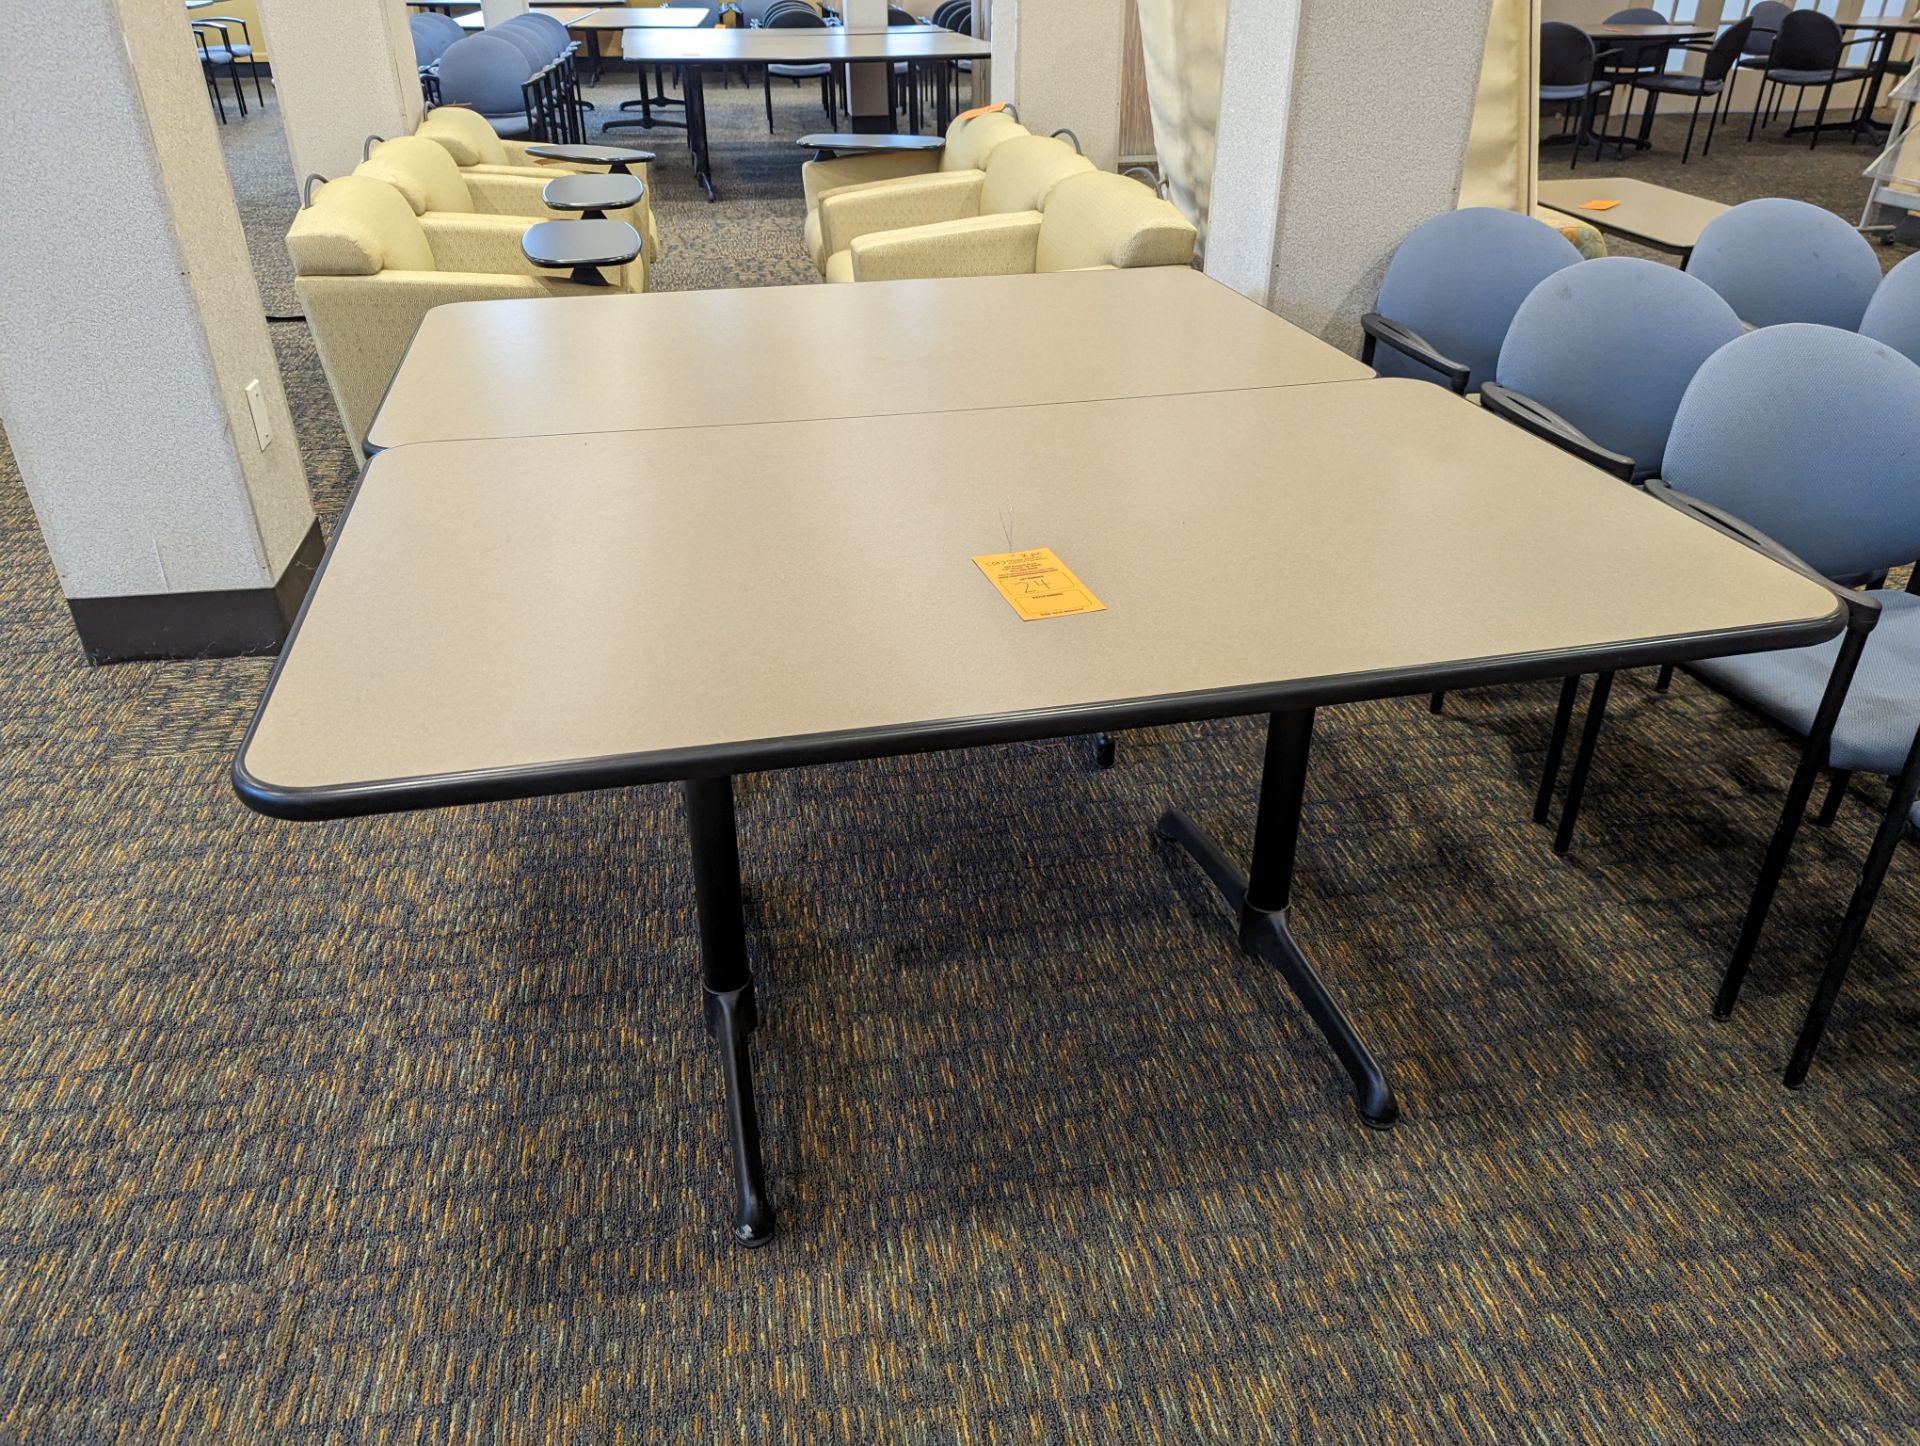 (2) CAFETERIA DINING TABLES